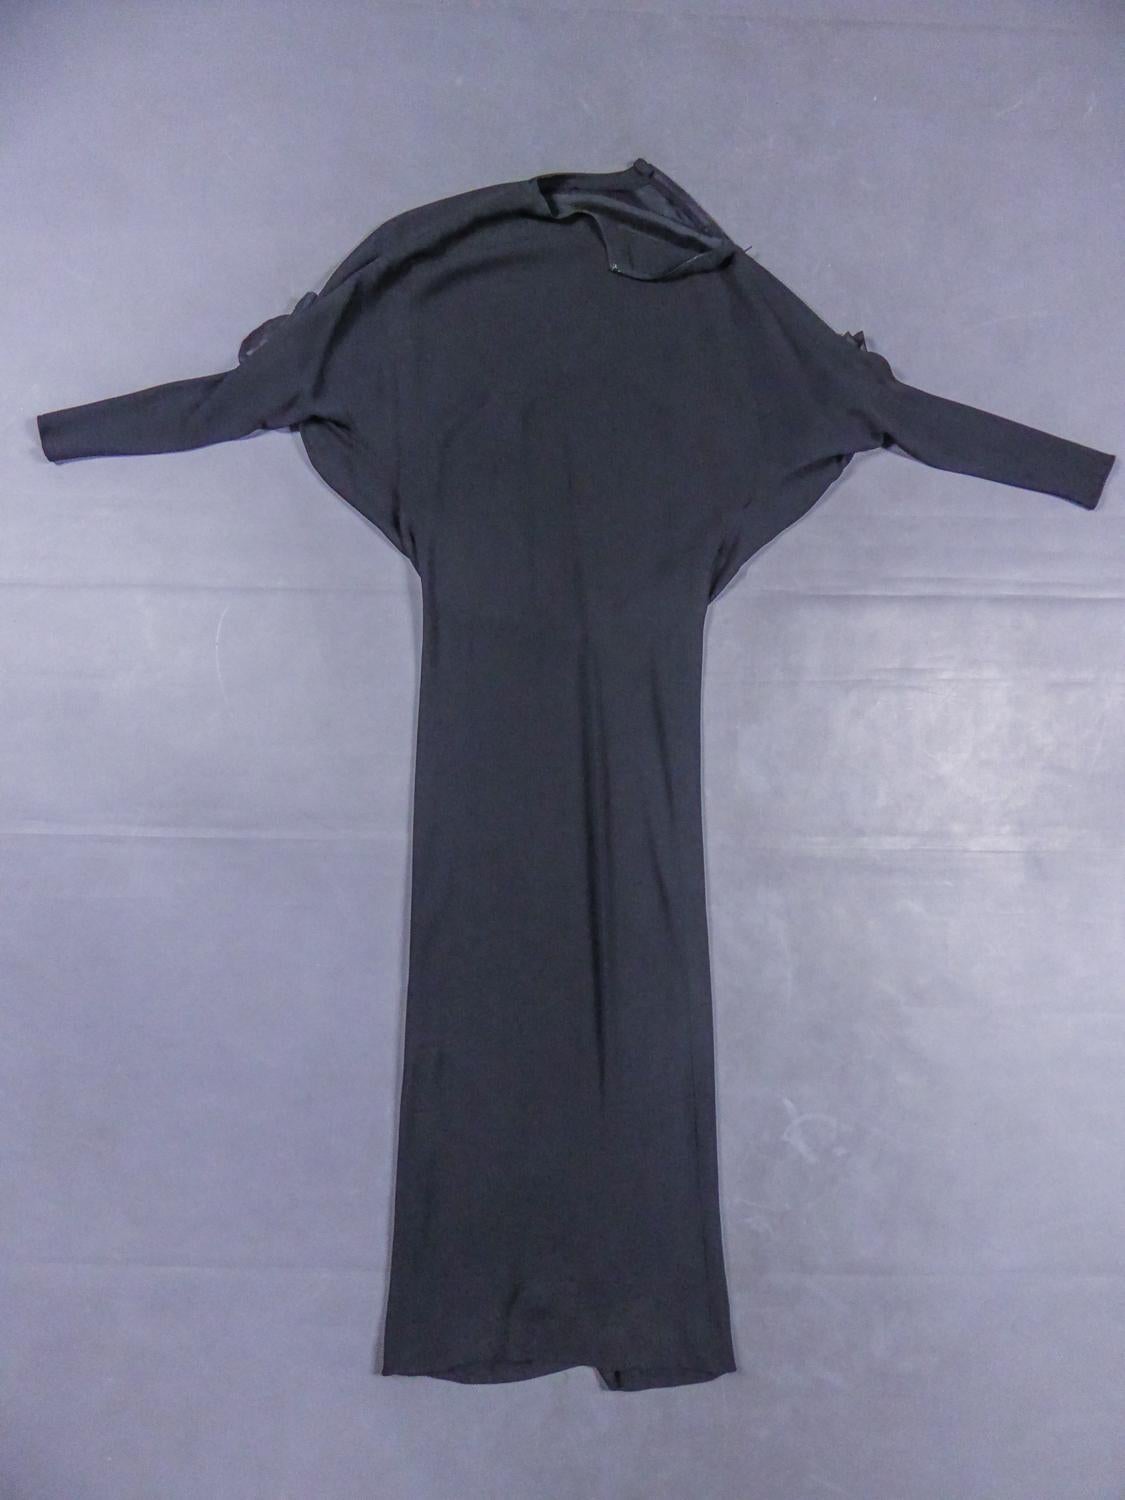 Circa 1976/1978

France

Beautiful evening dress Pierre Cardin Haute Couture in black silk jersey dating from the late 1970s. Crew neck dress in stretchy black silk jersey, with long bat sleeves decorated with two flowers with black silk petals and